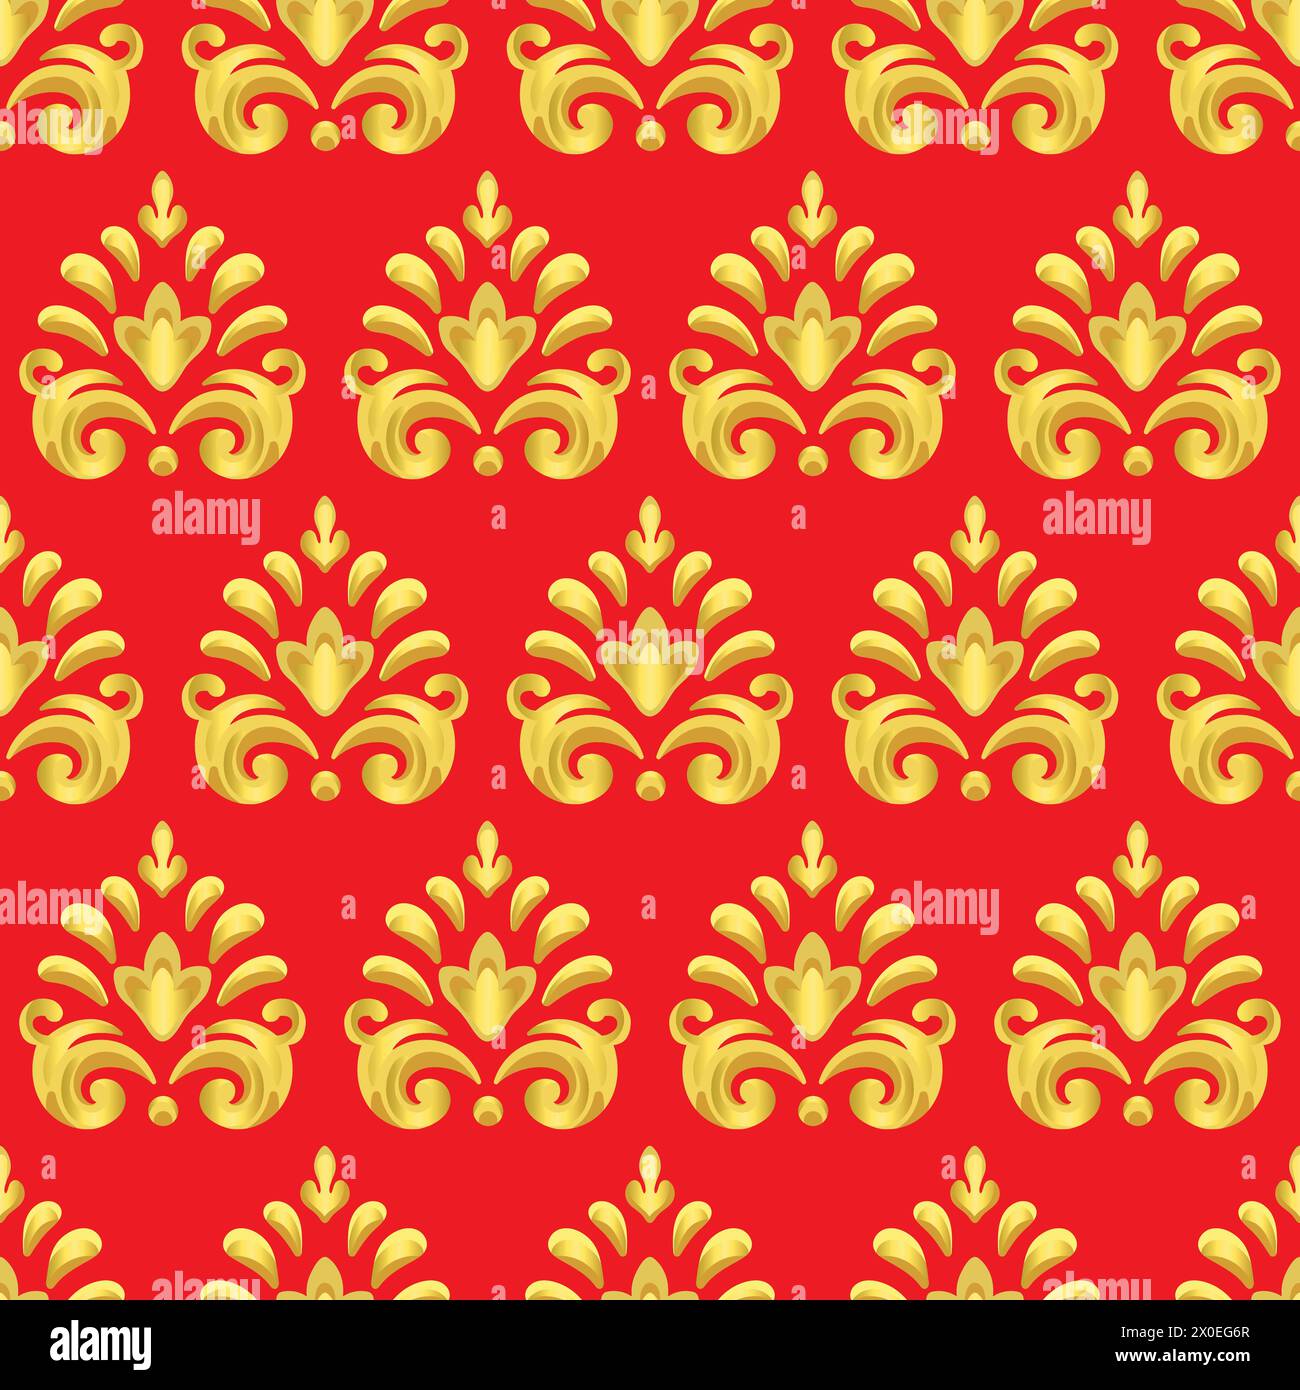 Abstract seamless pattern with decorative ornamental flower in Baroque, Rococo style. Symmetry golden elements on a red background. Vector illustratio Stock Vector